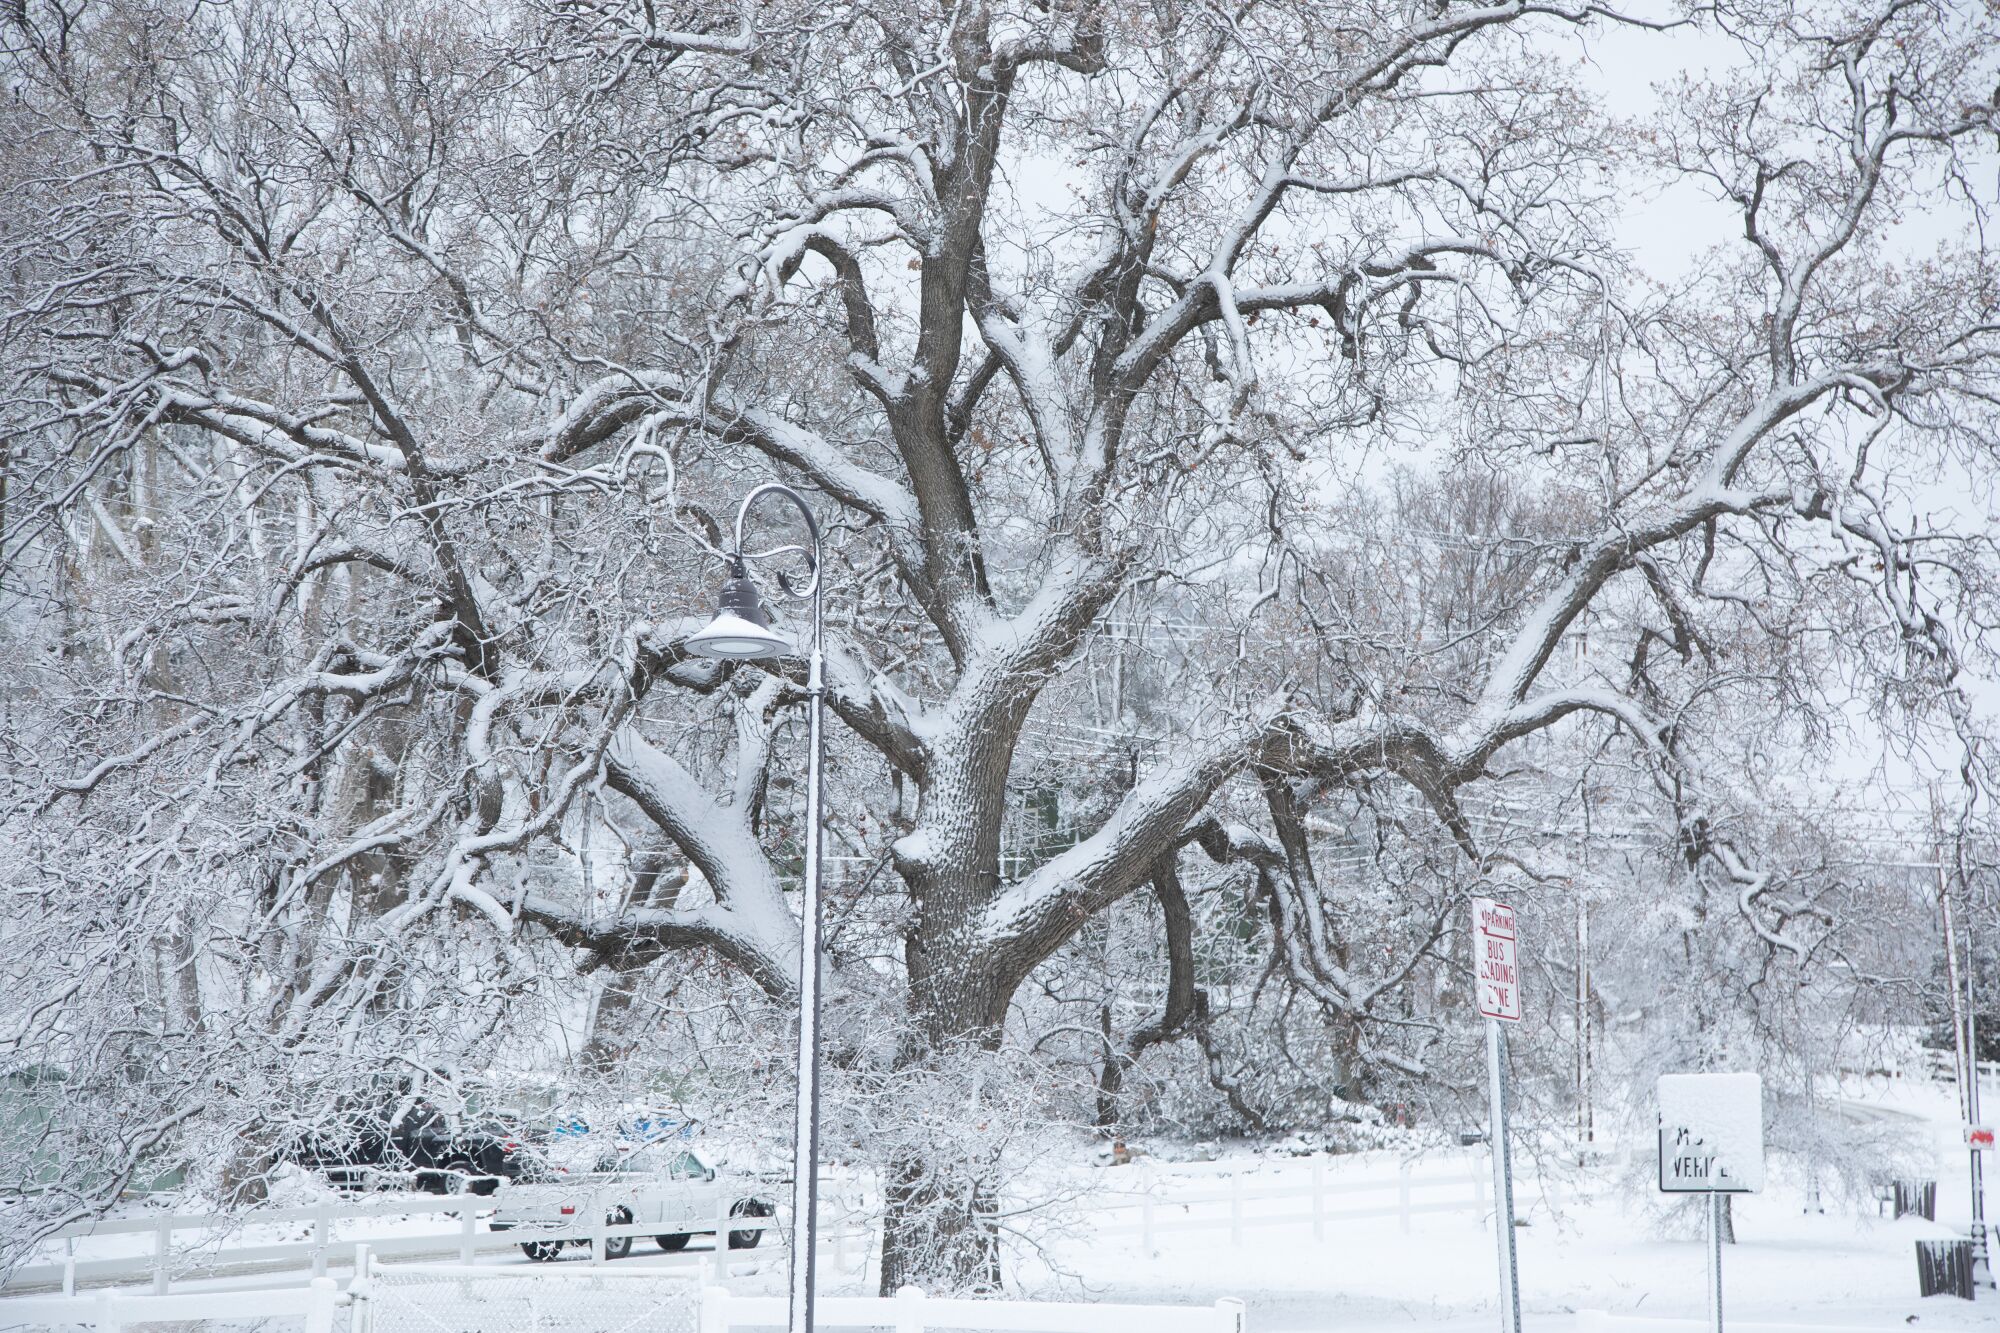 The Kern County community of Frazier Park was covered in snow after a winter storm passed through the region.